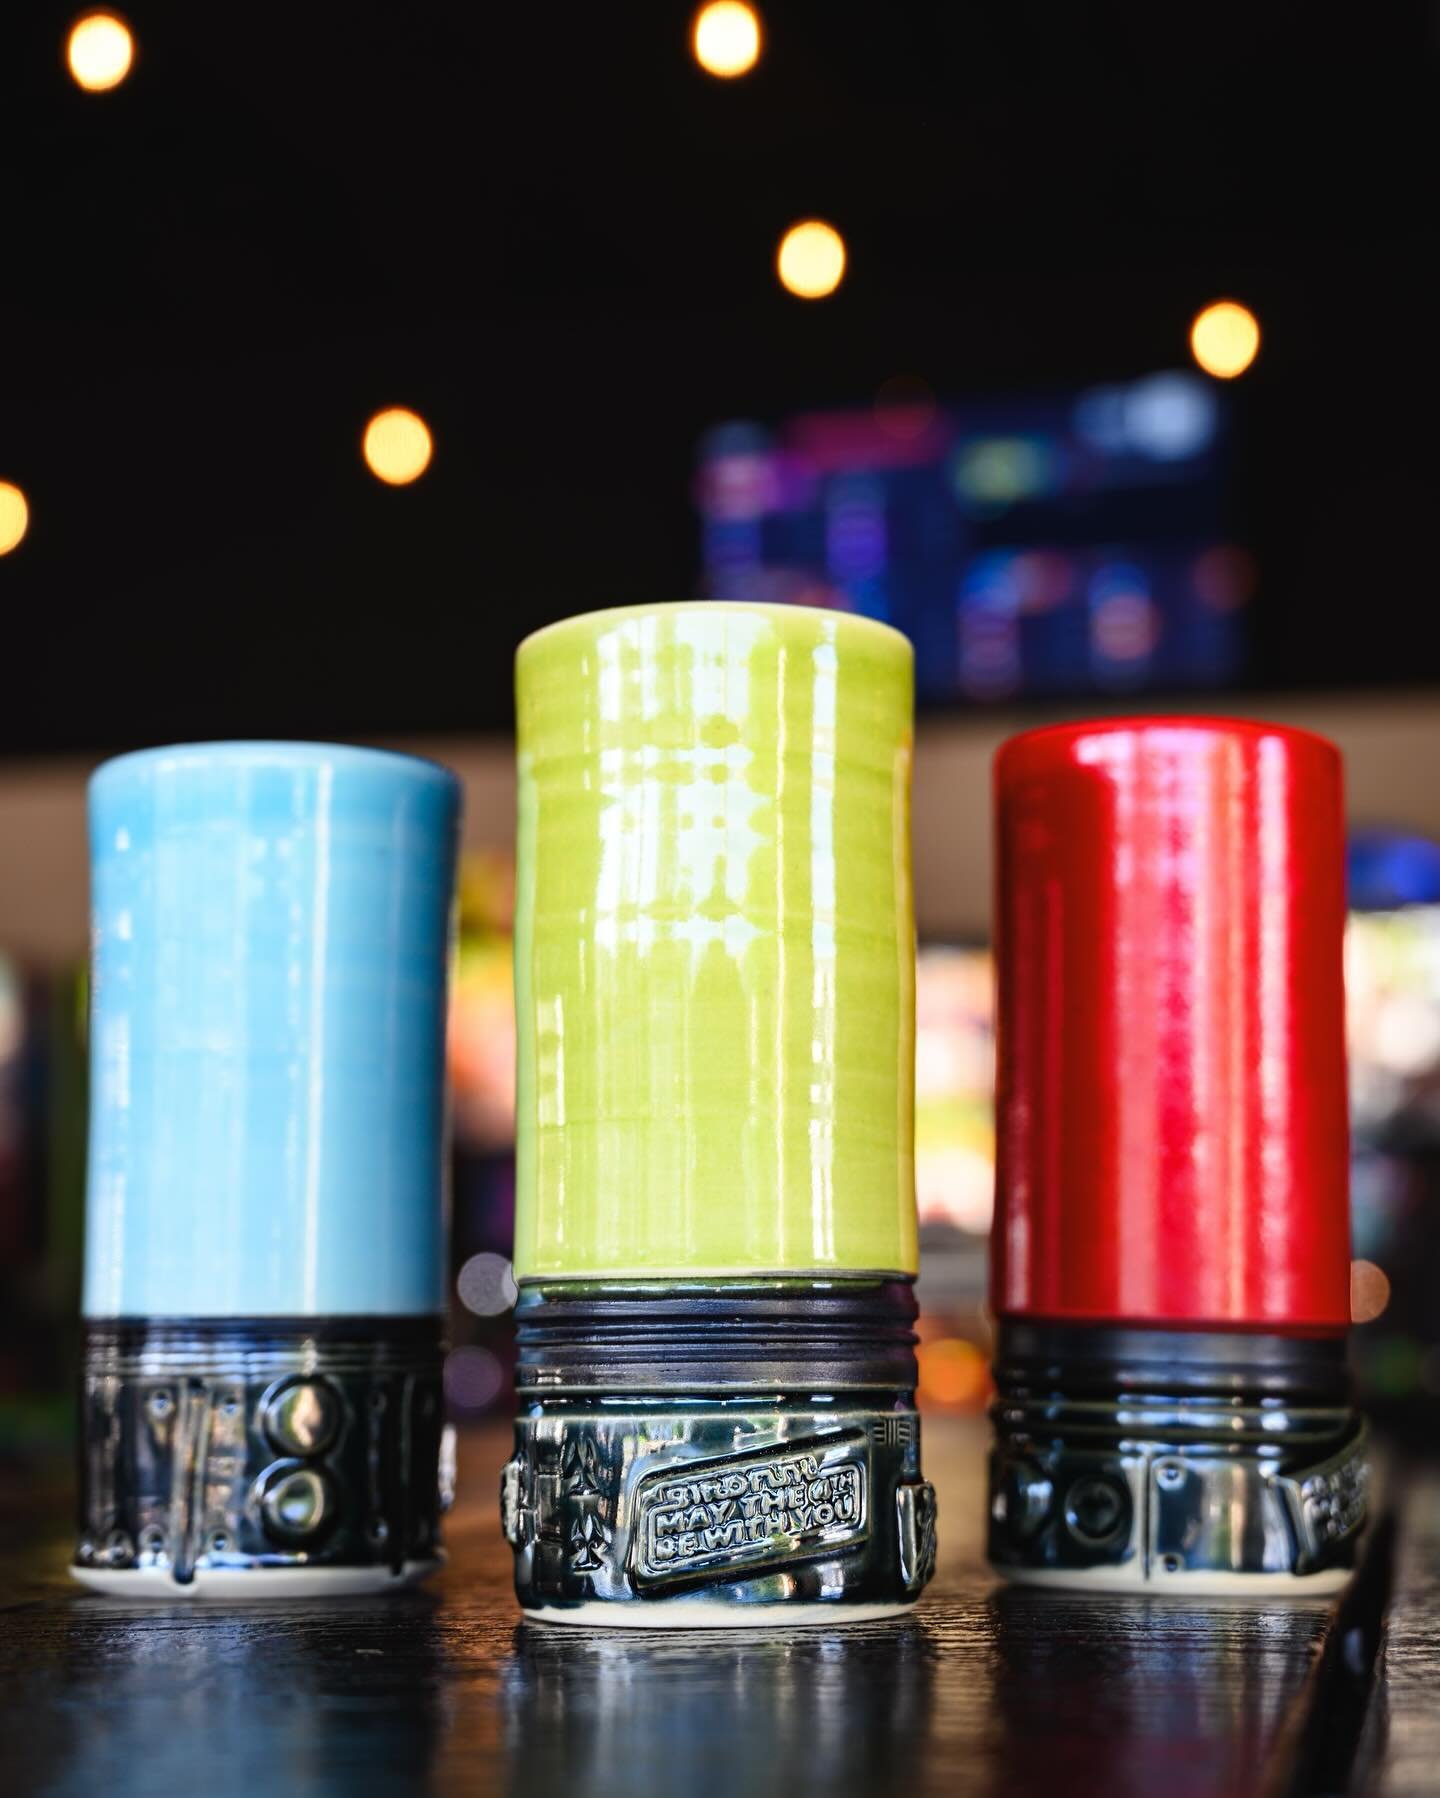 Drink beer, we must.

Join us this Saturday, May 4th for Star Wars Day and the annual release of Space Candy. We&rsquo;re open early at 10 a.m. with these Star Wars Day 2024 custom hand thrown ceramic LIGHTSABER steins from Stray Cat Studio. Availabl